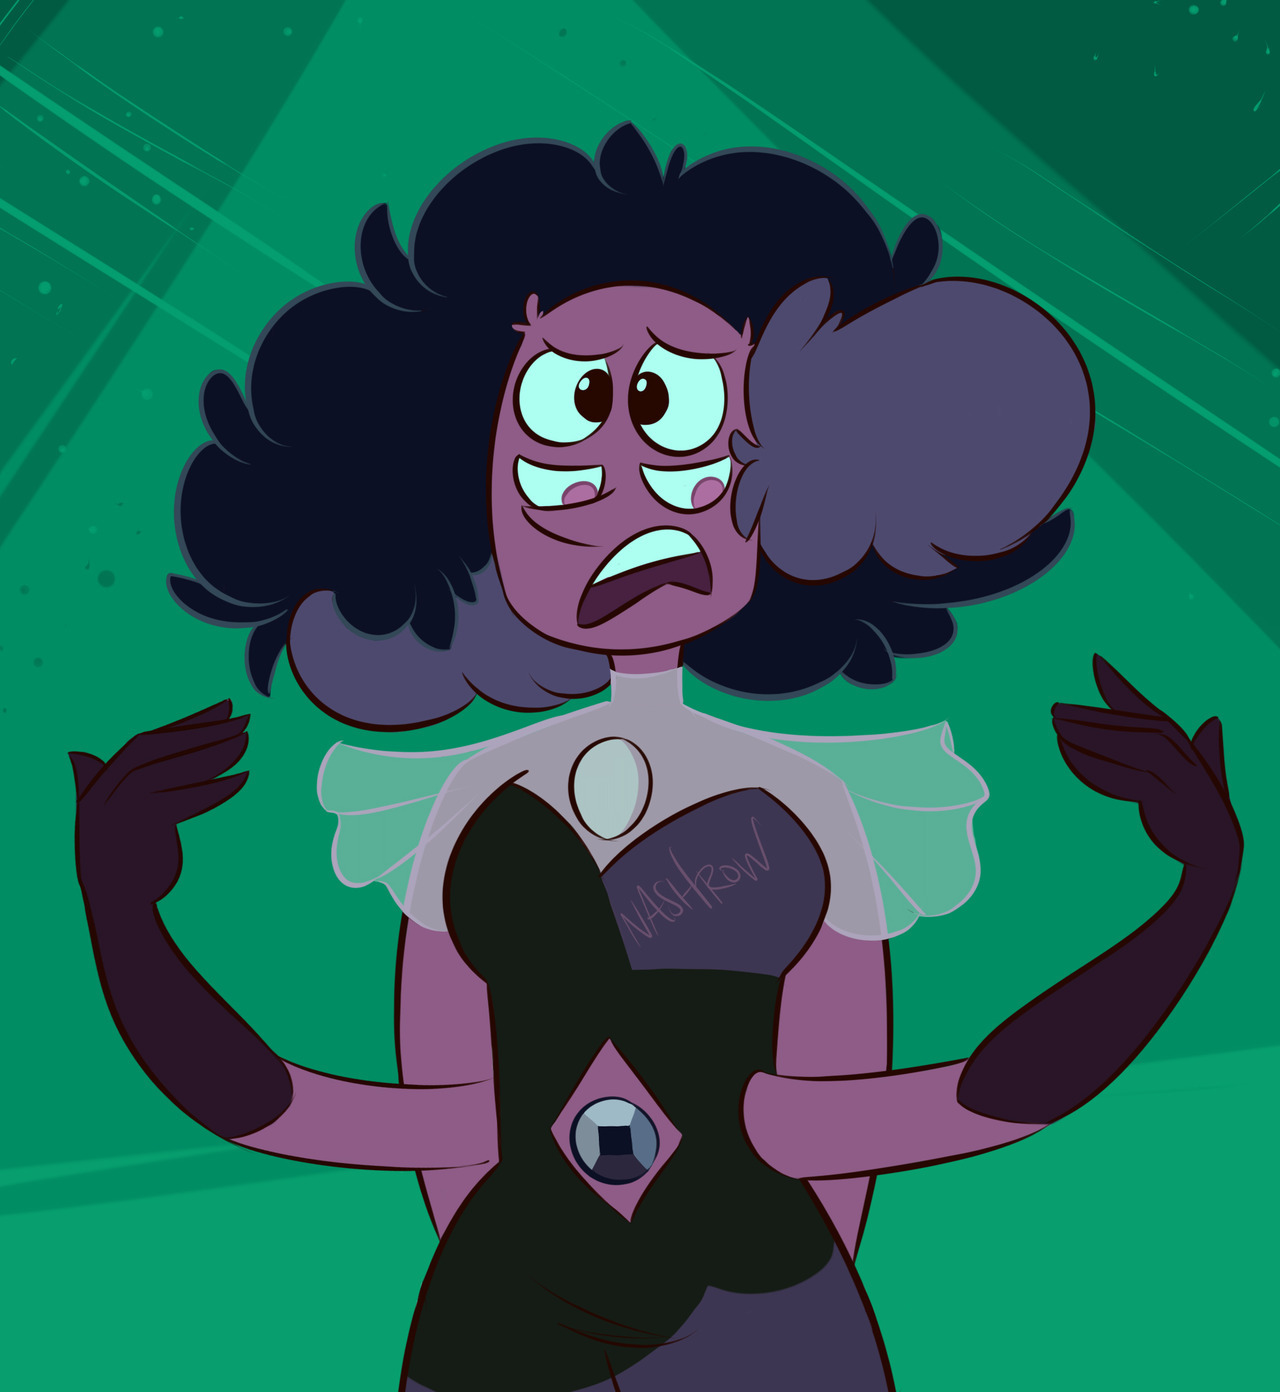 Quick Rhodonite since I still have a heckton of SU sketches from the newest episodes.